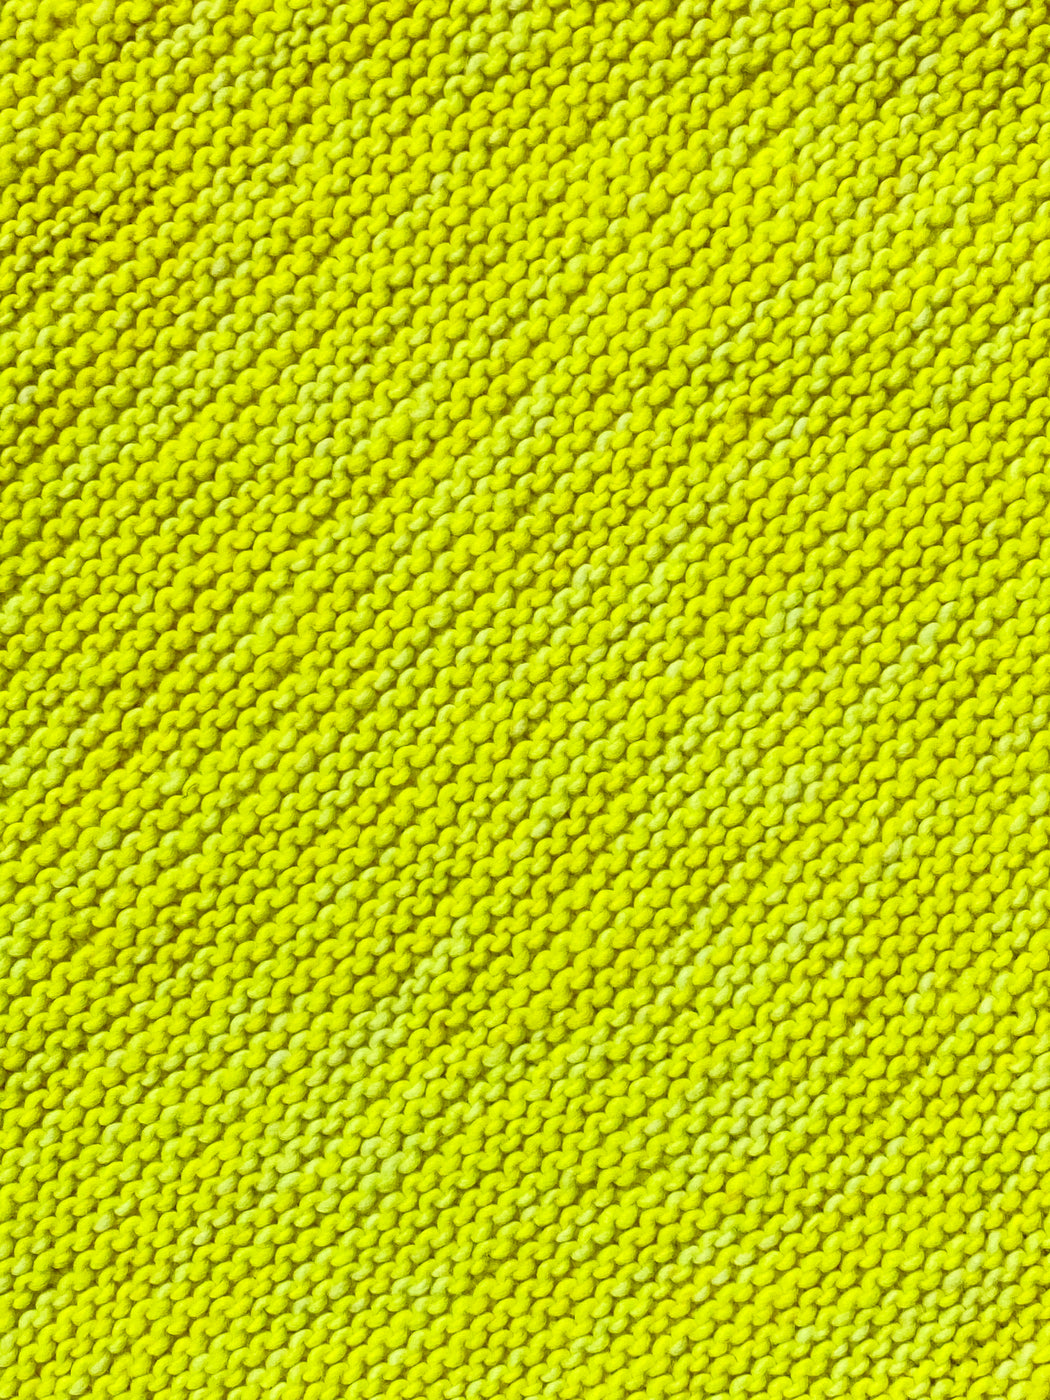 Aunt Debbie's Hand-Knitted  Baby Blanket -  Day Glo Yellow